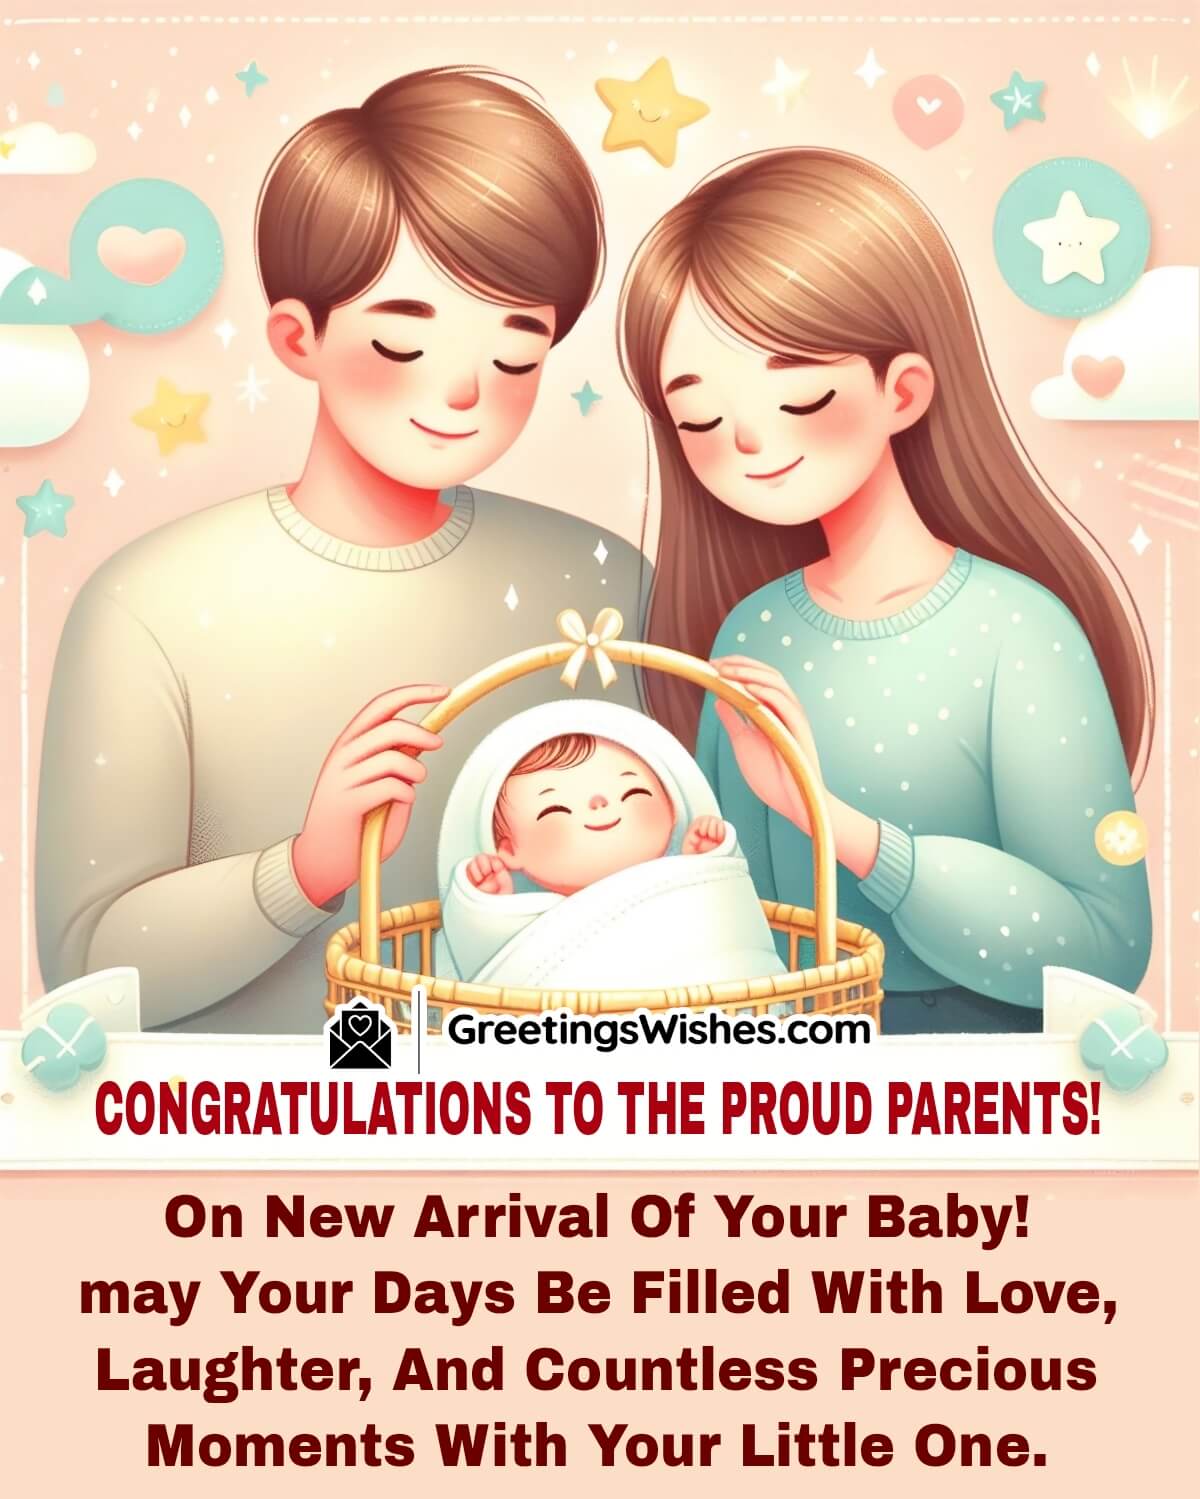 Congratulations Wish To The Proud Parents!